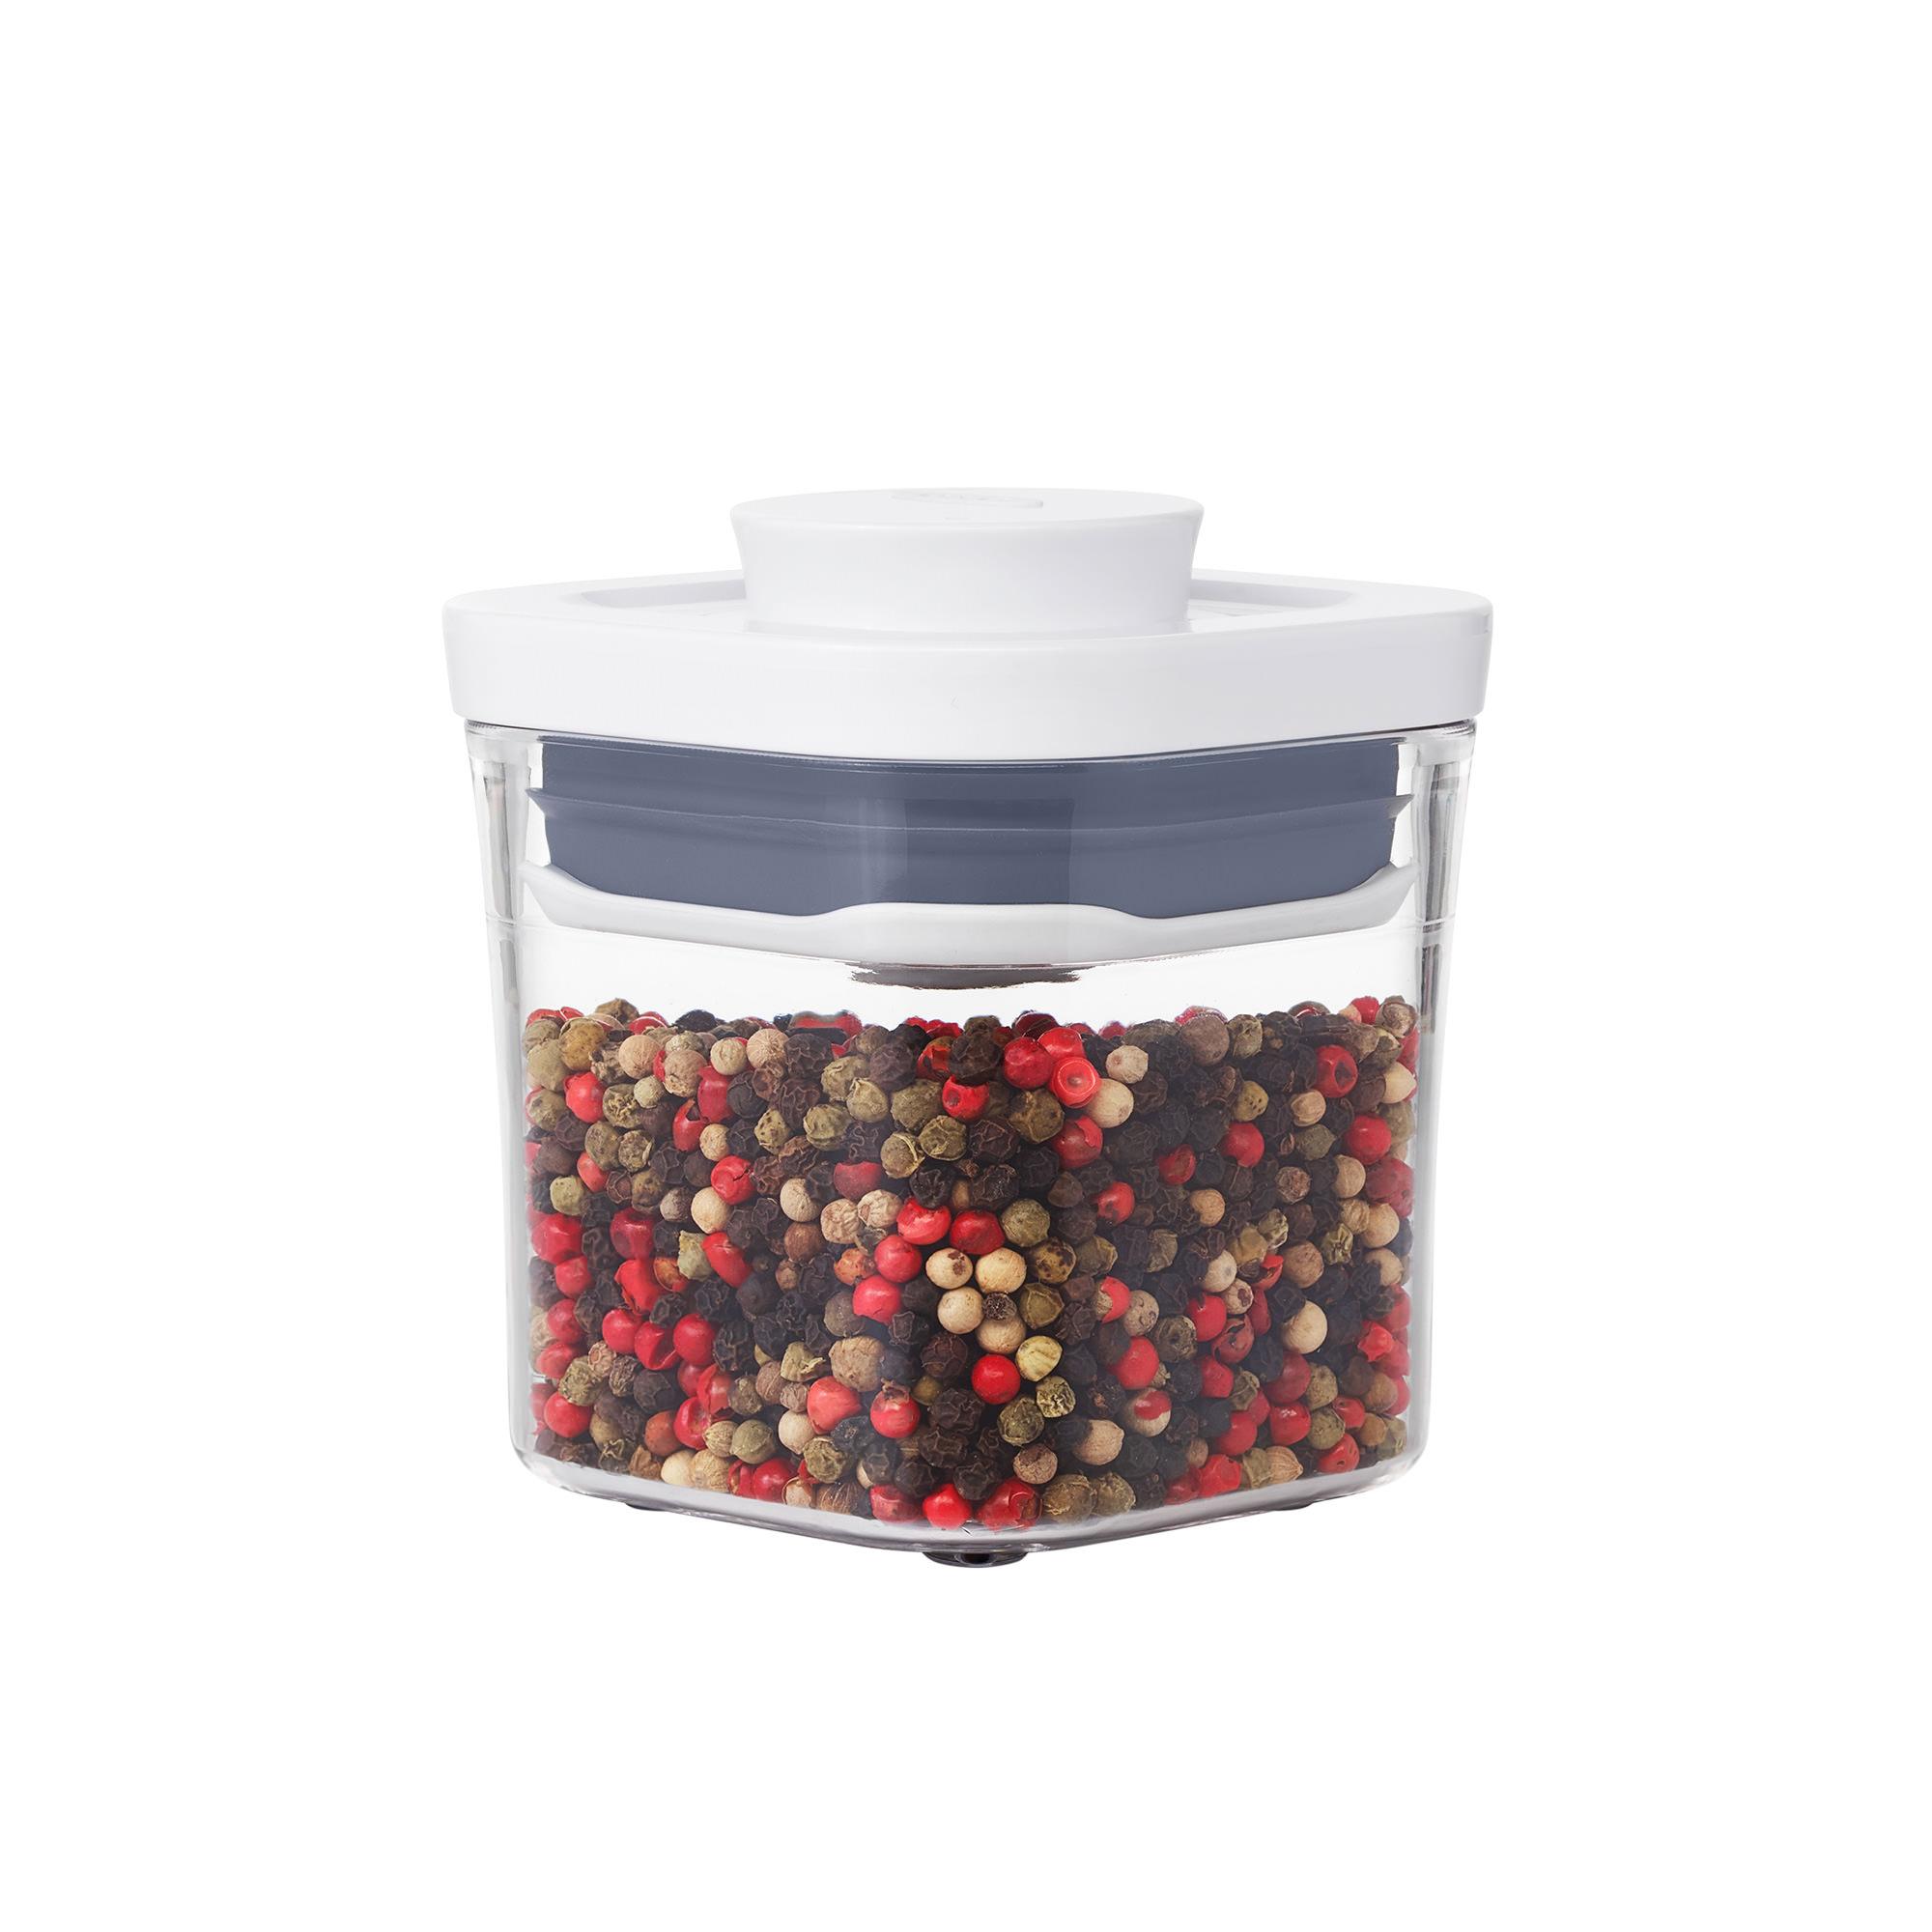 OXO Good Grips Square Pop 2.0 Container 200ml Image 4